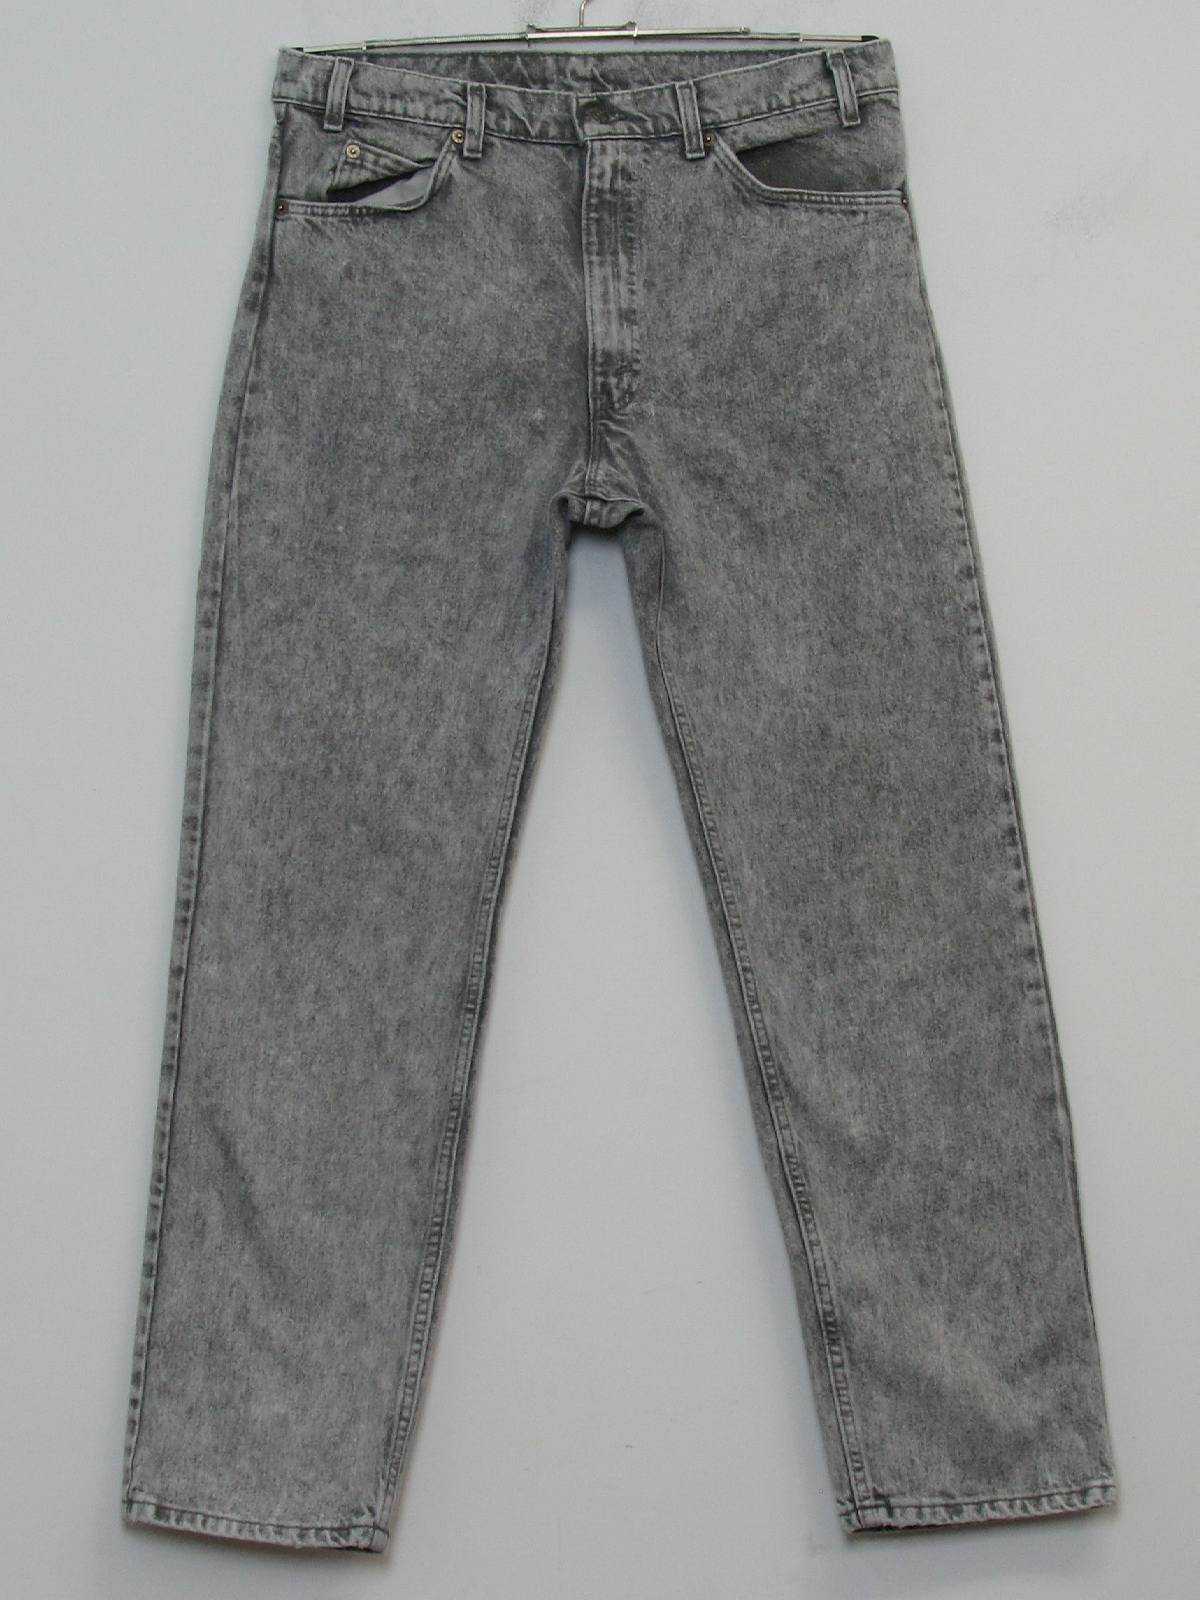 Eighties Vintage Pants: 80s -Levis- Mens grey on grey stone washed ...